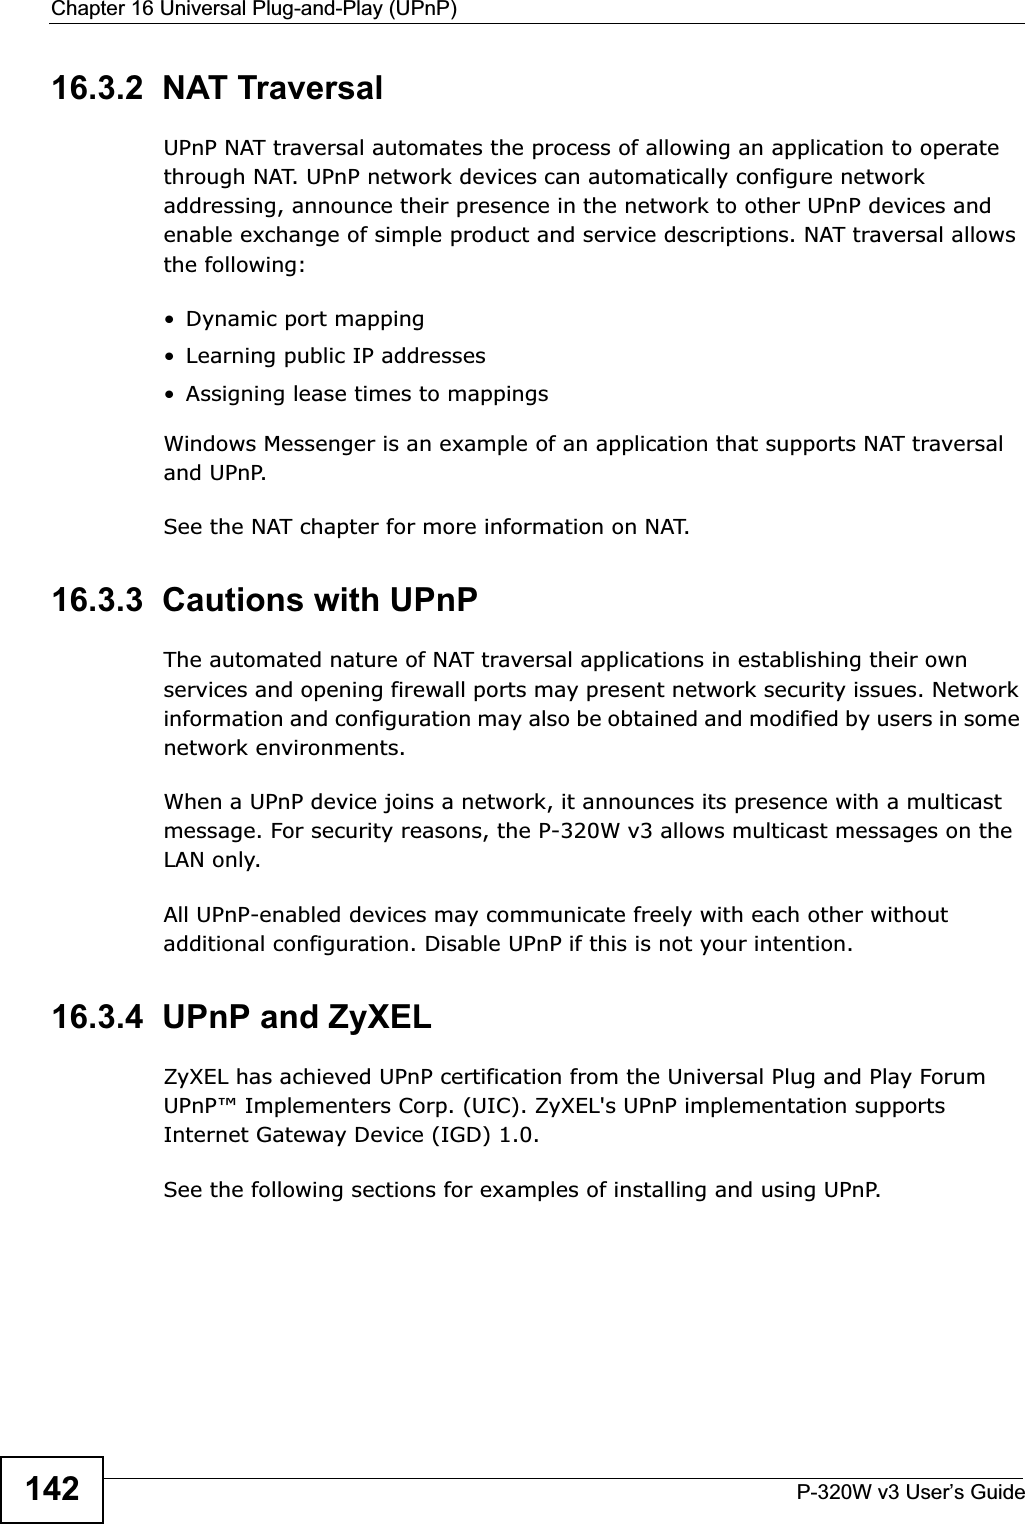 Chapter 16 Universal Plug-and-Play (UPnP)P-320W v3 User’s Guide14216.3.2  NAT TraversalUPnP NAT traversal automates the process of allowing an application to operate through NAT. UPnP network devices can automatically configure network addressing, announce their presence in the network to other UPnP devices and enable exchange of simple product and service descriptions. NAT traversal allows the following:• Dynamic port mapping• Learning public IP addresses• Assigning lease times to mappingsWindows Messenger is an example of an application that supports NAT traversal and UPnP. See the NAT chapter for more information on NAT.16.3.3  Cautions with UPnPThe automated nature of NAT traversal applications in establishing their own services and opening firewall ports may present network security issues. Network information and configuration may also be obtained and modified by users in some network environments. When a UPnP device joins a network, it announces its presence with a multicast message. For security reasons, the P-320W v3 allows multicast messages on the LAN only.All UPnP-enabled devices may communicate freely with each other without additional configuration. Disable UPnP if this is not your intention. 16.3.4  UPnP and ZyXELZyXEL has achieved UPnP certification from the Universal Plug and Play Forum UPnP™ Implementers Corp. (UIC). ZyXEL&apos;s UPnP implementation supports Internet Gateway Device (IGD) 1.0.See the following sections for examples of installing and using UPnP.